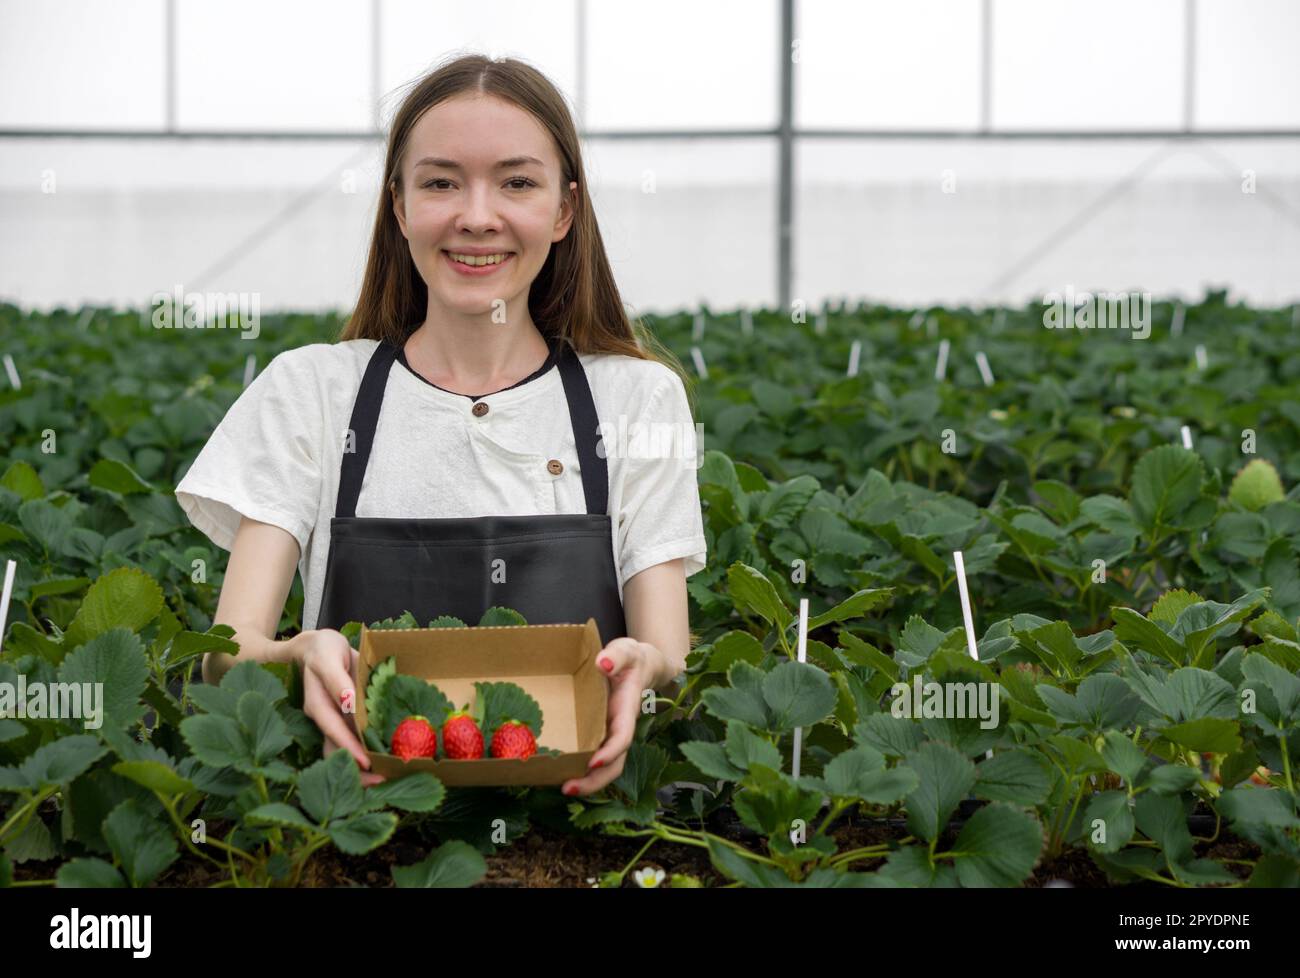 Young female tourist in apron holding paper box containing freshly picked Japanese strawberries from the garden. Fragrant, sweet, big, juicy, satisfying taste while visiting the indoor farm. Stock Photo